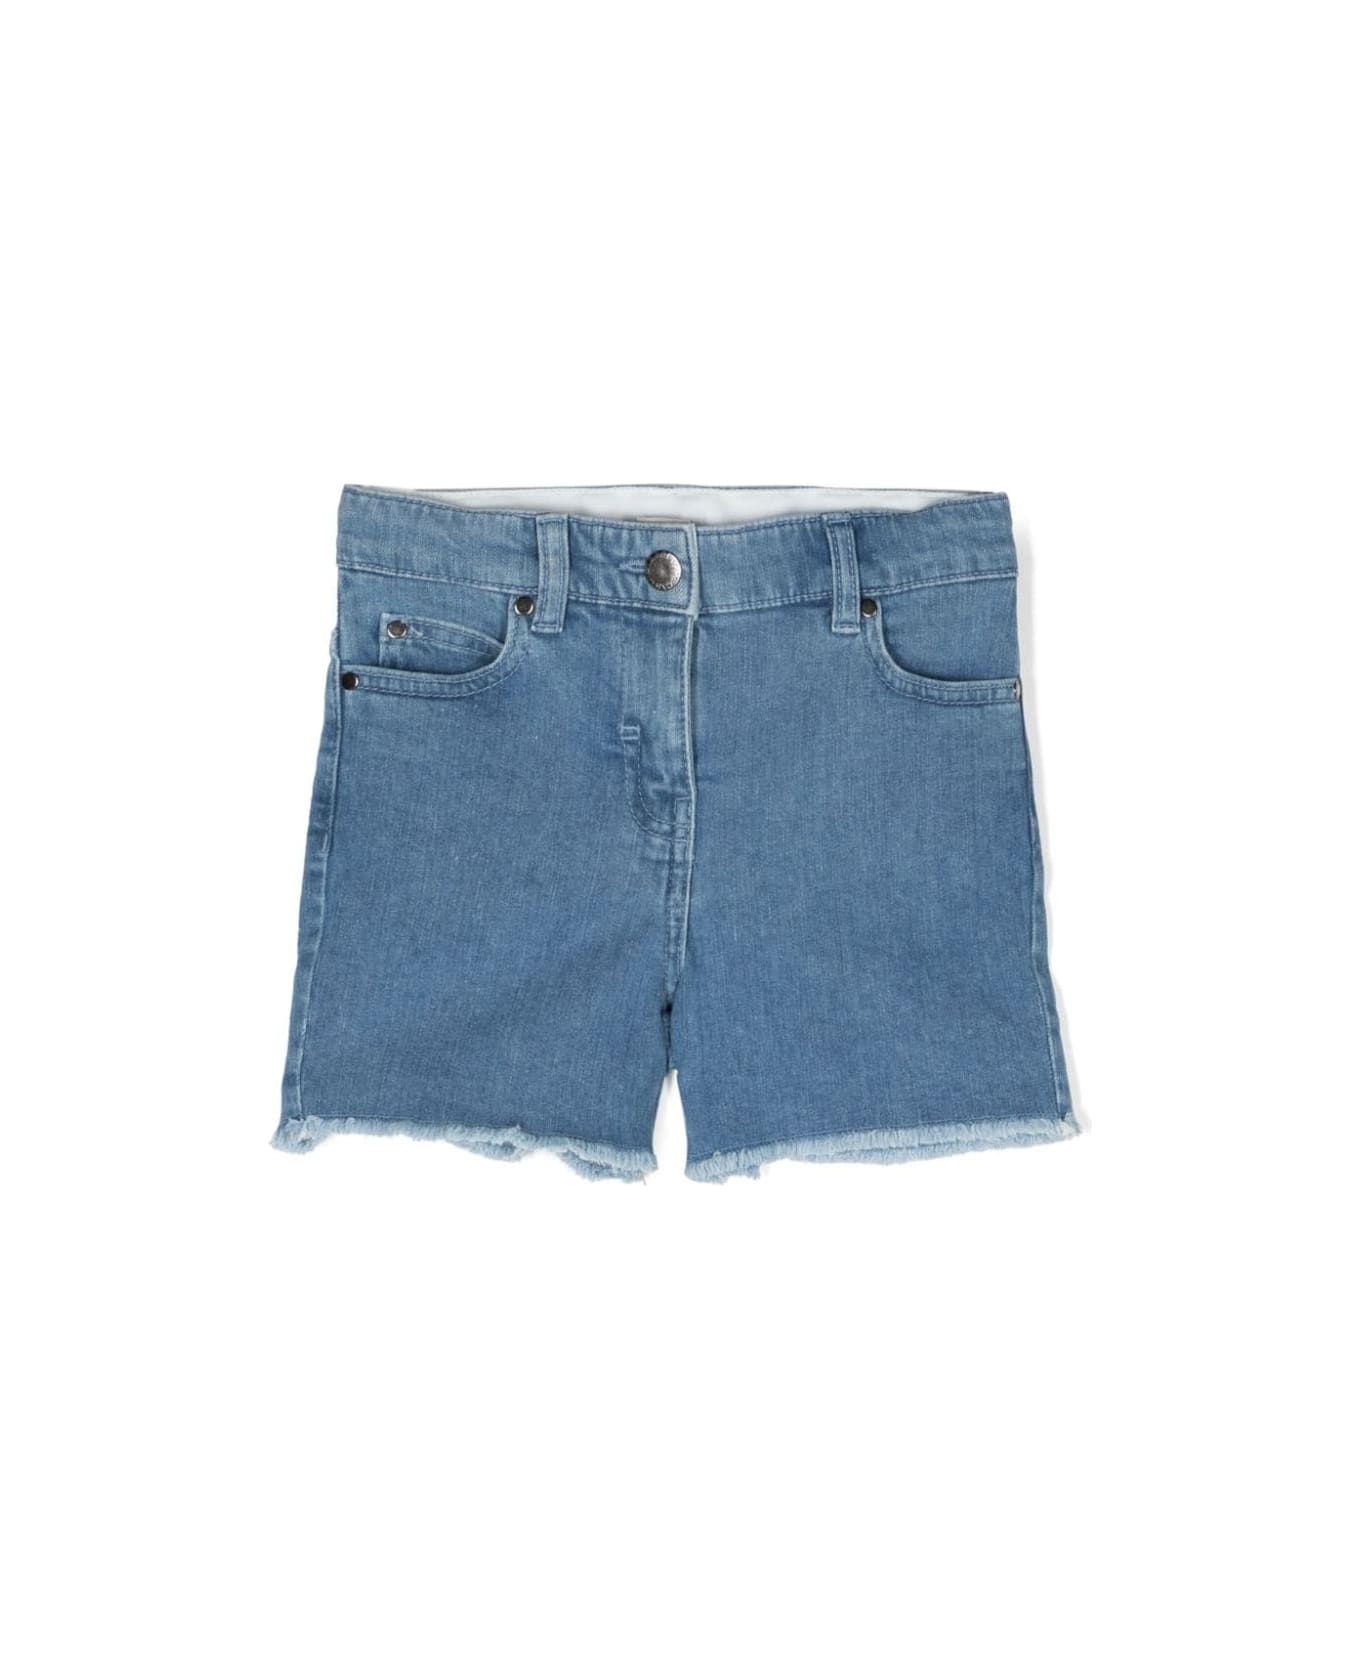 Stella McCartney Kids Denim Shorts With Frayed Hearts Patches - Blue